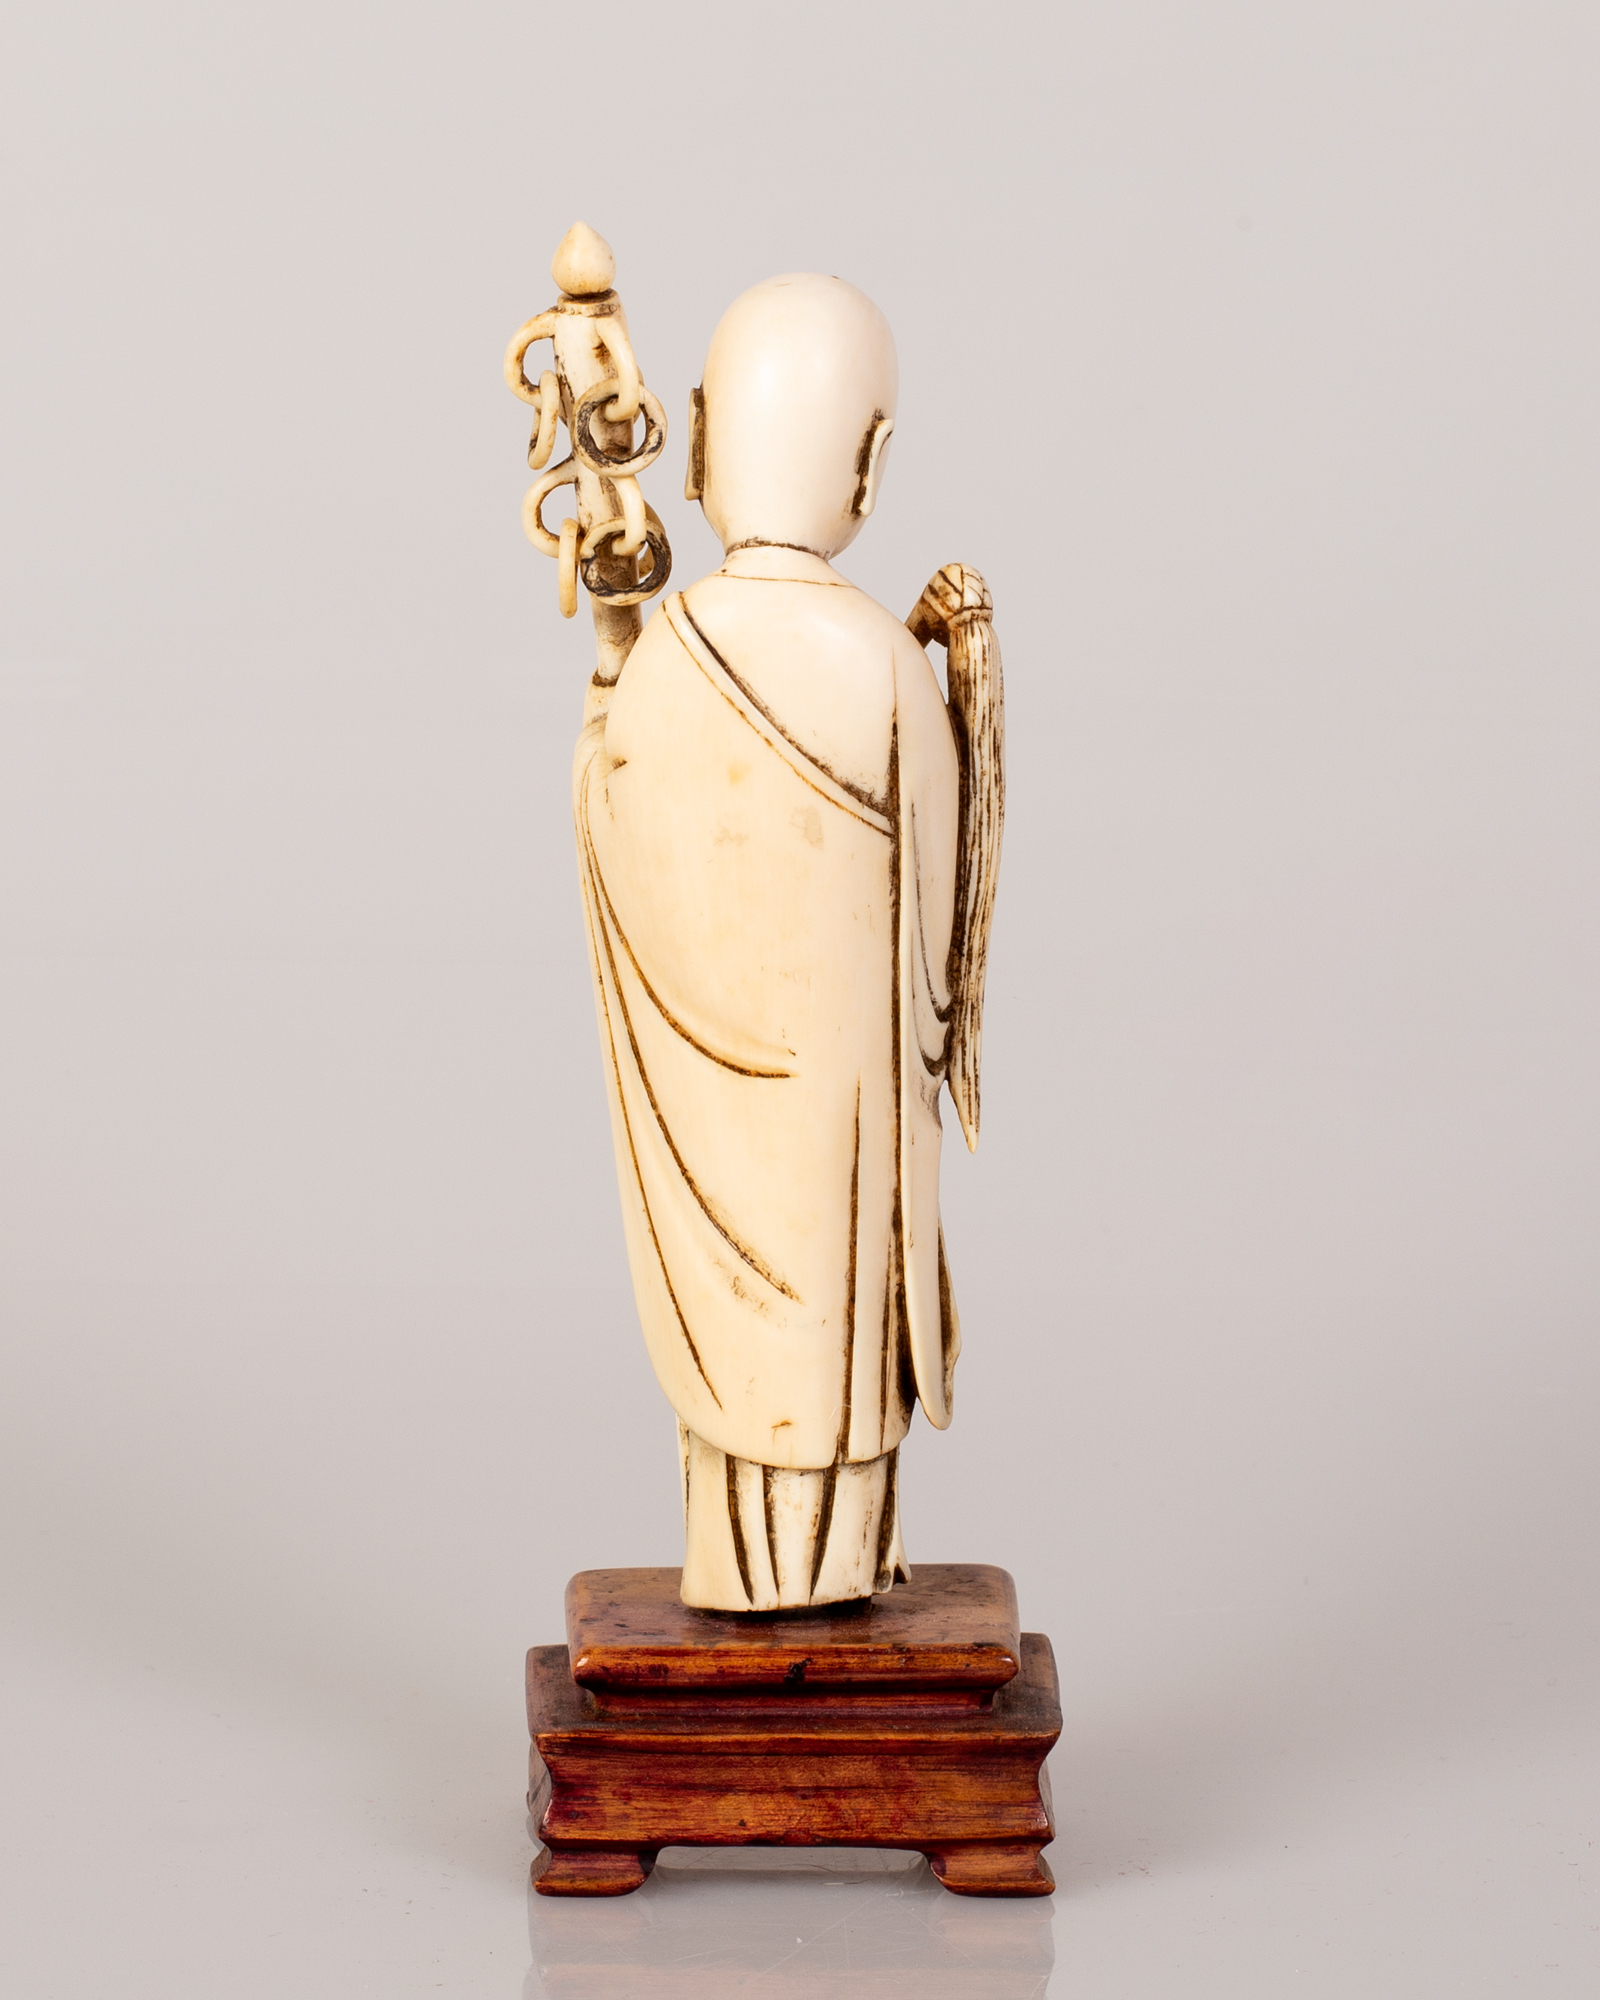 Chinese Bone Sculpture Girl Holding a Wand on Wooden Stand - Image 2 of 3